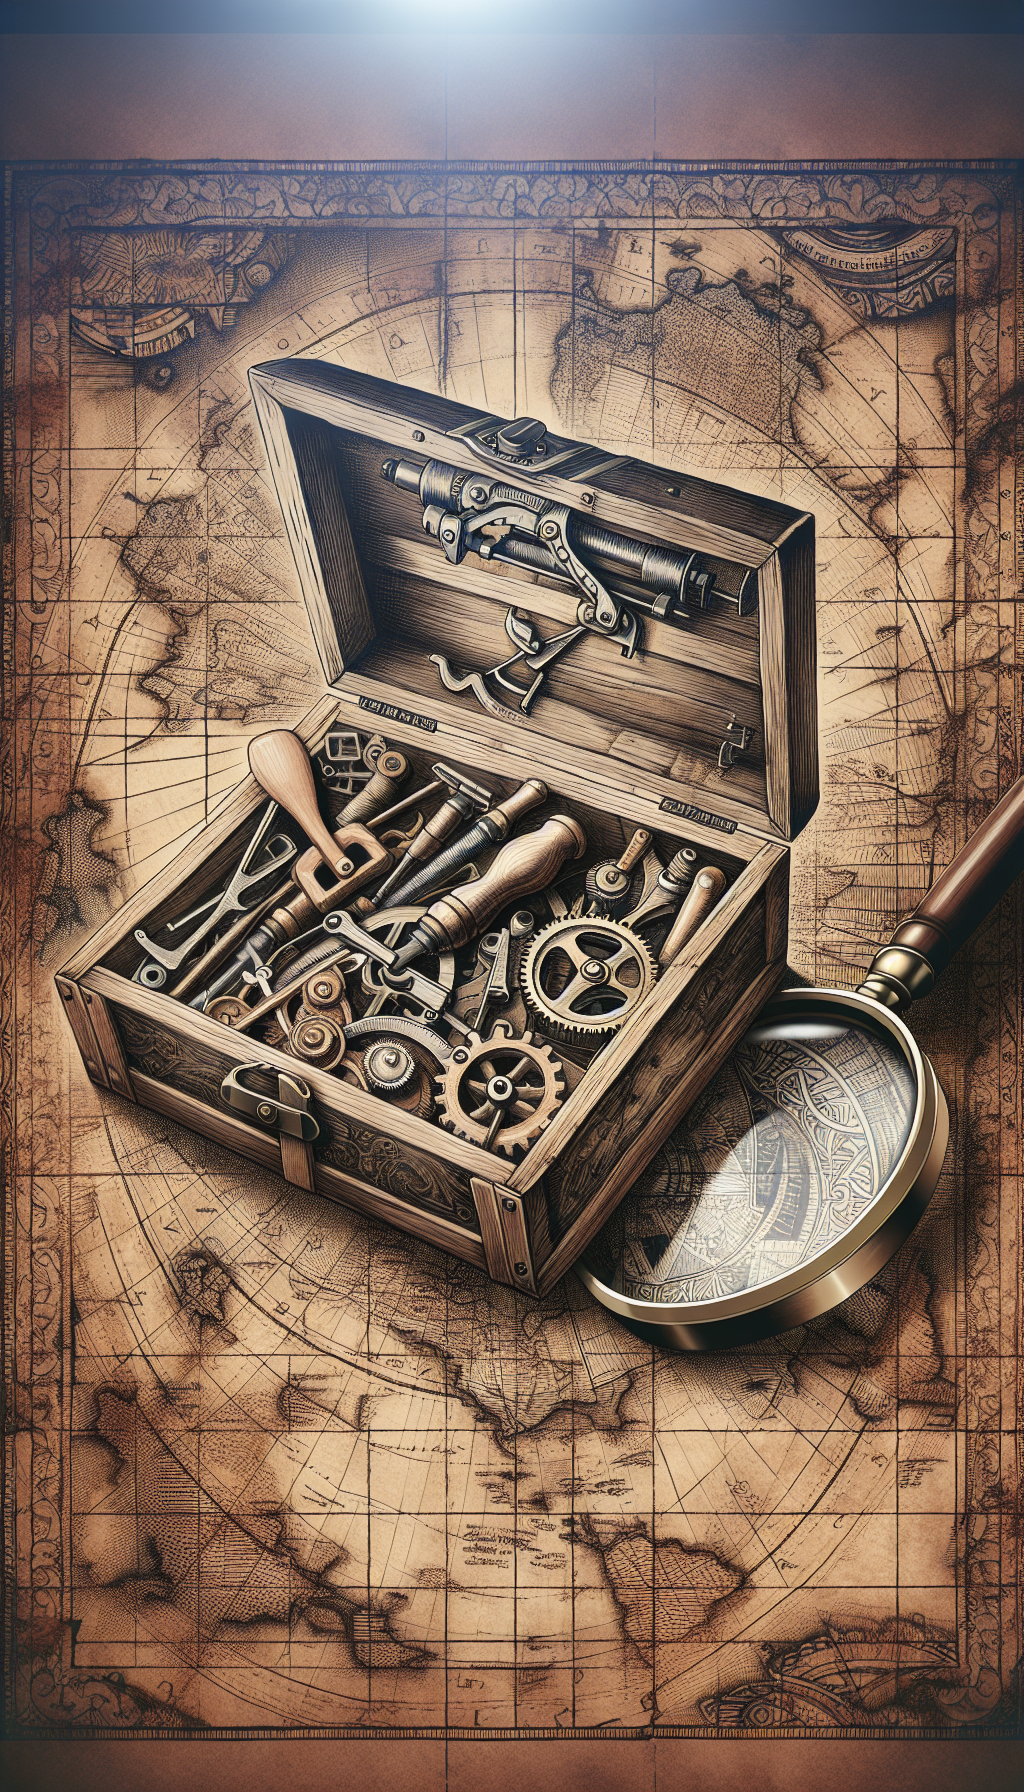 An illustration depicts a weathered, open treasure chest with a magnifying glass hovering above it, revealing a spectral overlay of intricate patterns that identify different antique tools within, such as a hand-crank drill and a wooden plane. The chest sits atop an ancient map, with the magnifying glass casting a light shaped like a key, symbolizing the unlocking of historical knowledge.